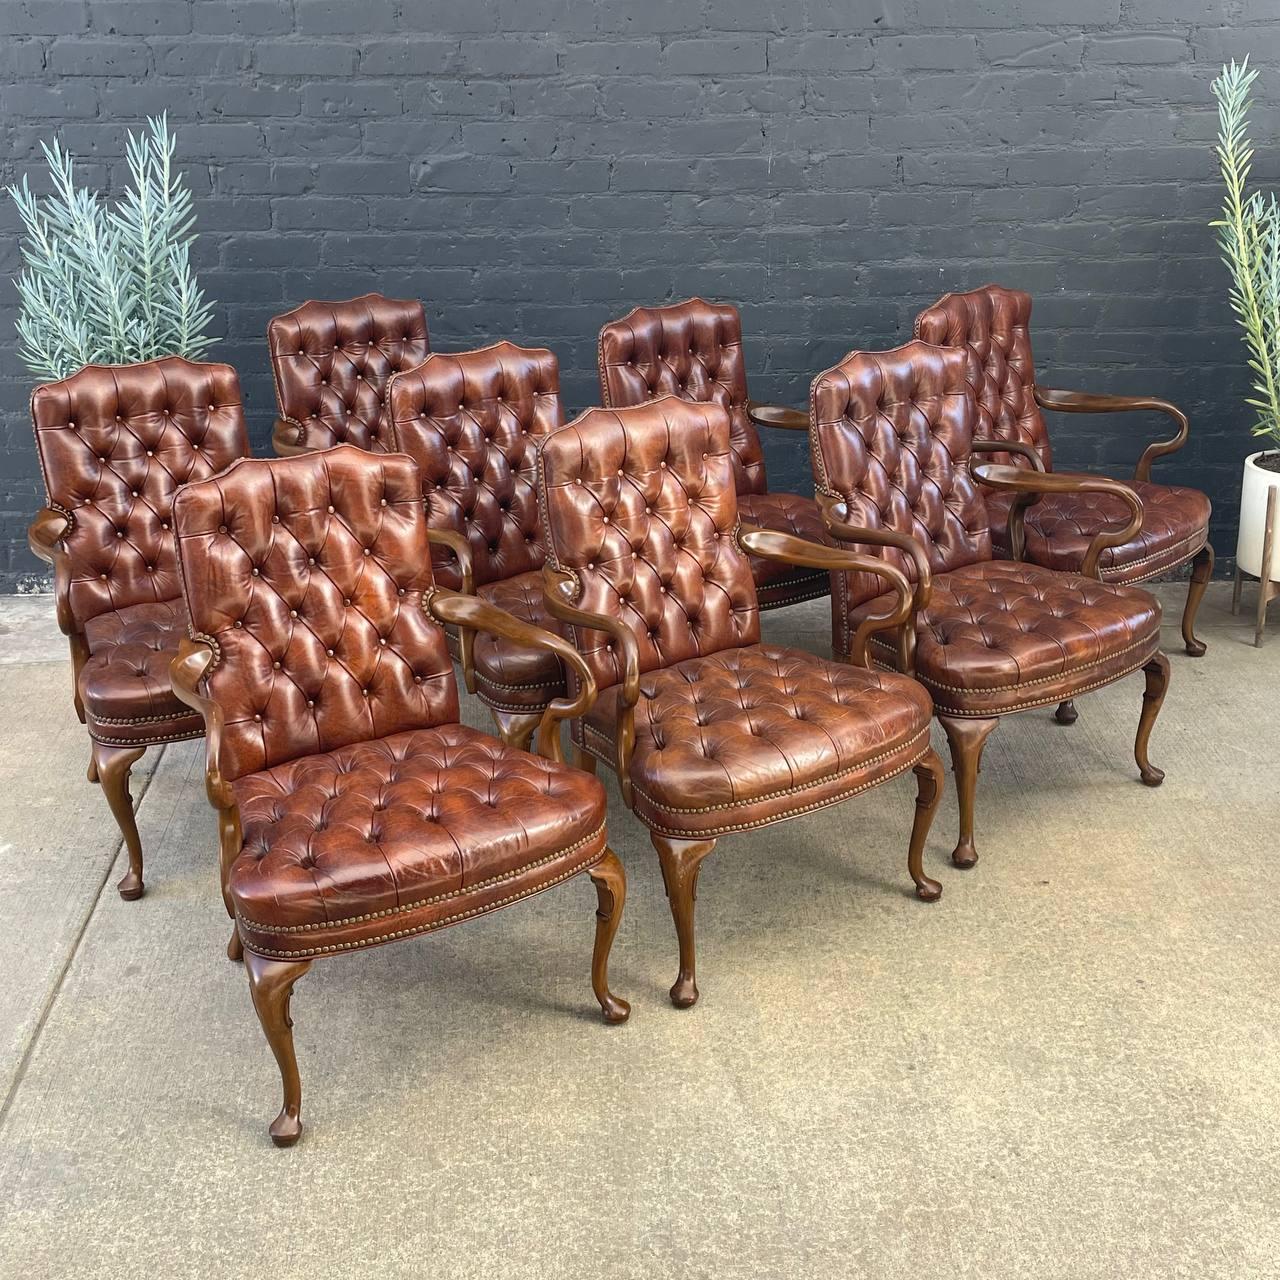 Set of 8 Mid-Century Modern Chesterfield Style Cognac Leather Arm Chairs

Original Vintage Condition

Dimensions: 
38”H x 27”W x 25”D
Seat Height 18.50”